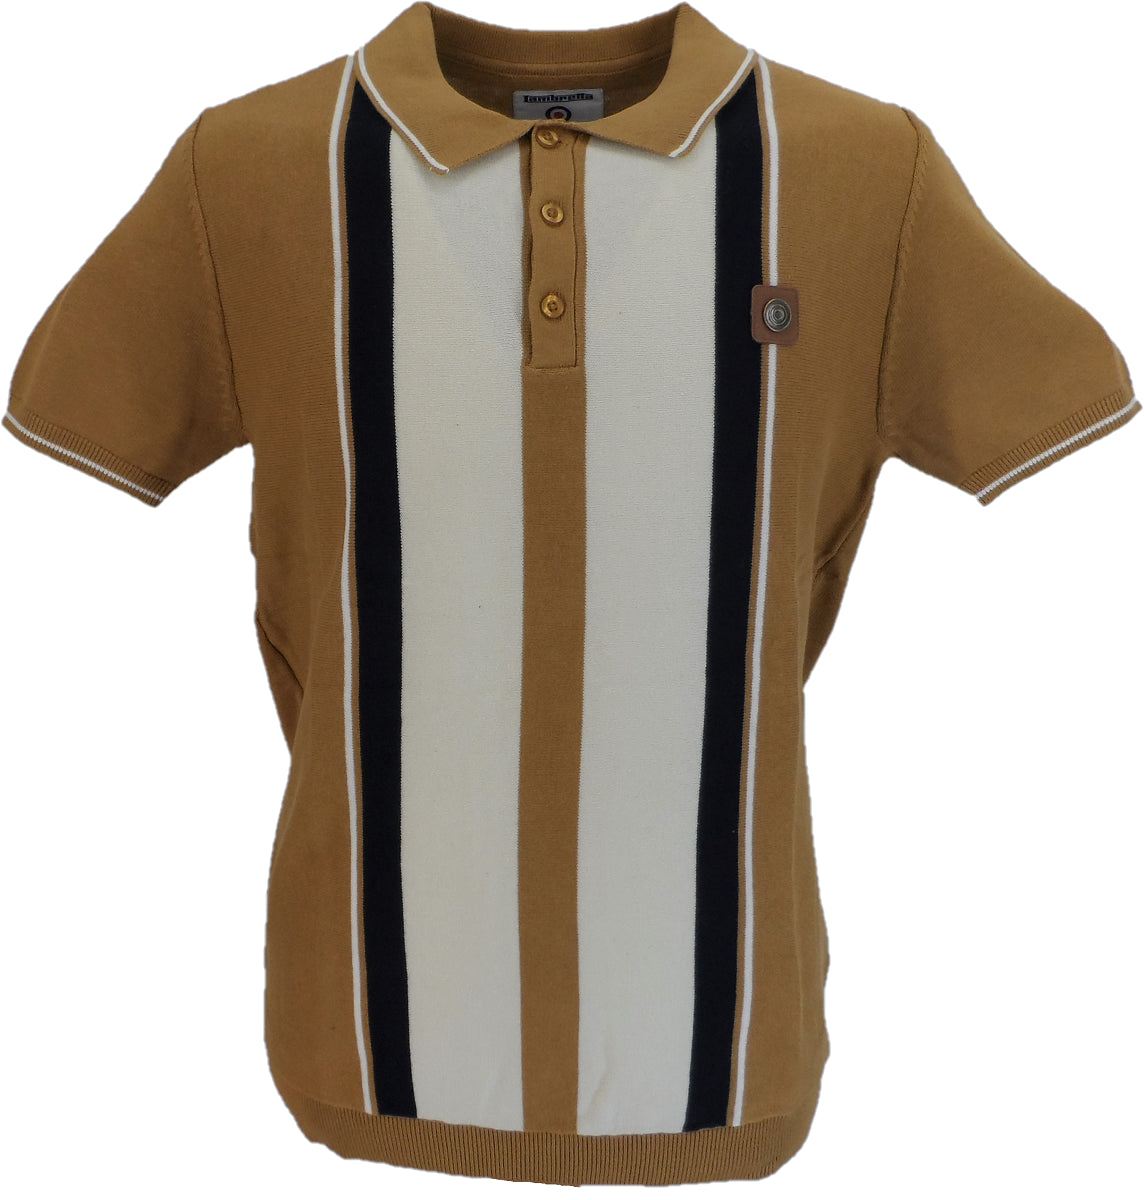 Men's Knitted Polo Shirt